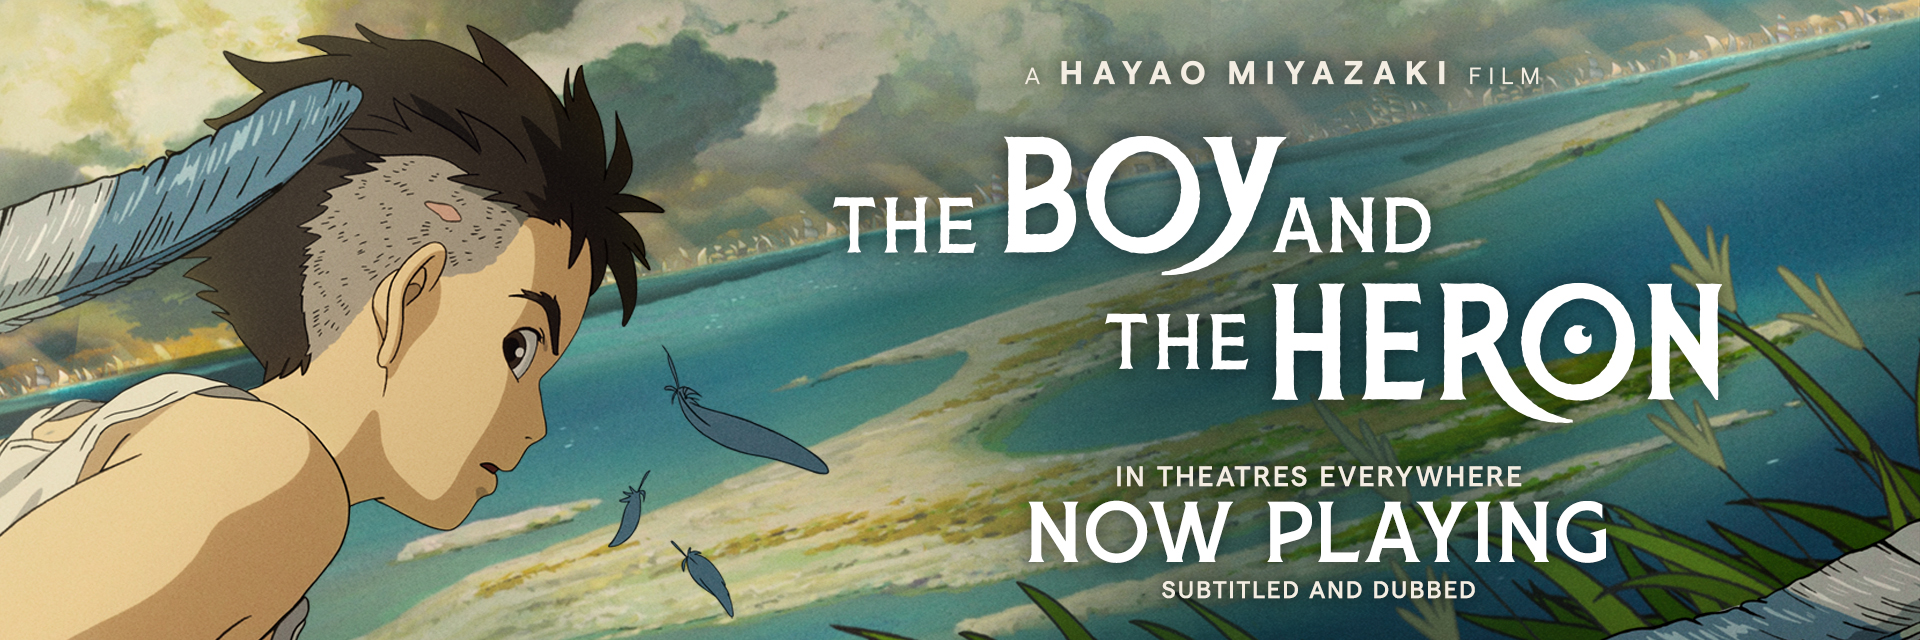 THE BOY AND THE HERON - Now Playing - CLICK TO LEARN MORE